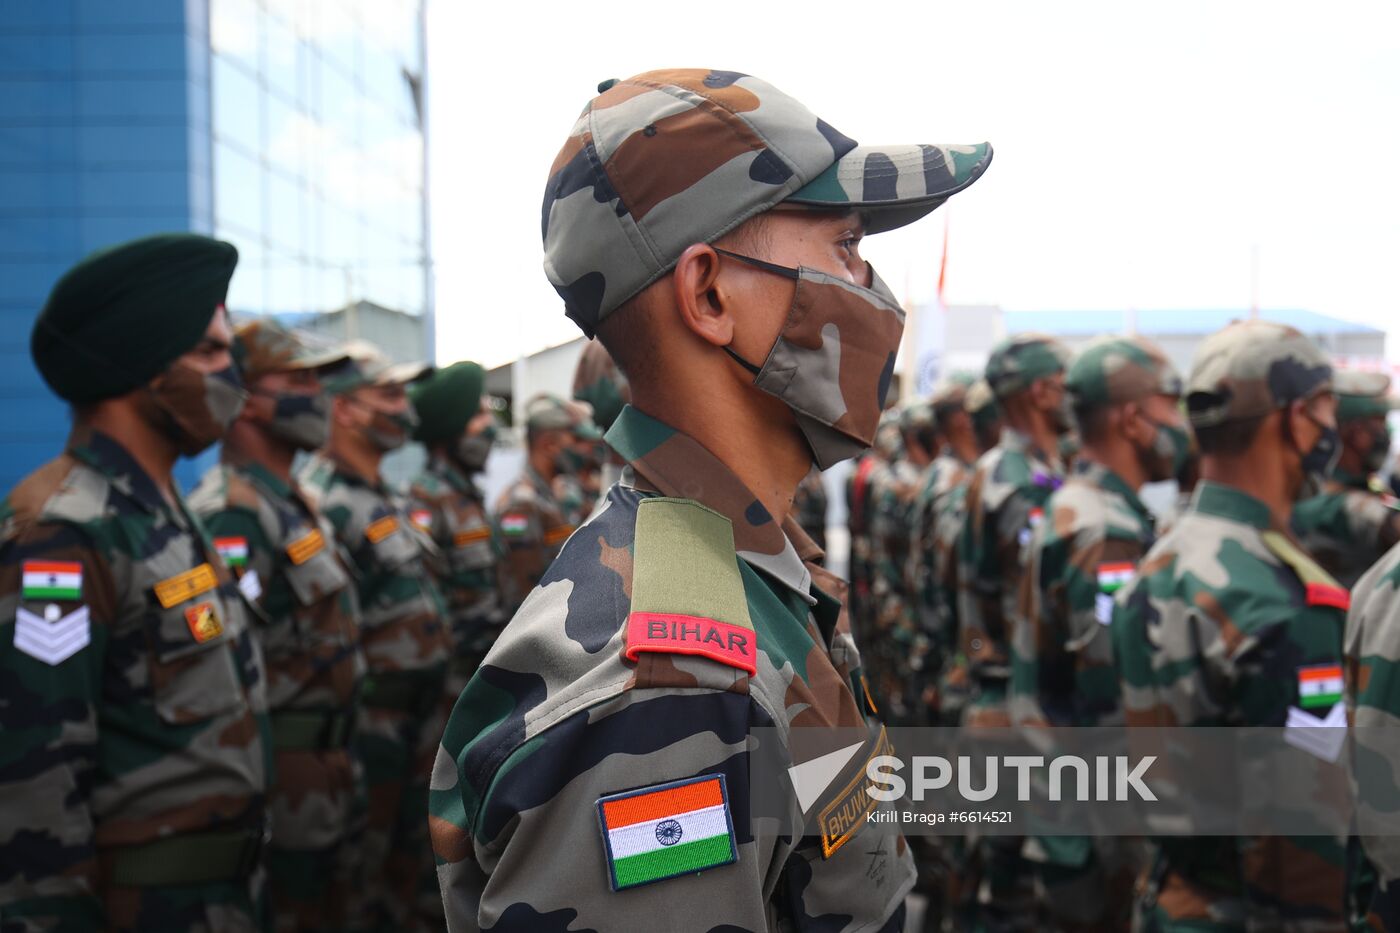 Russia India Joint Military Drills Preparations